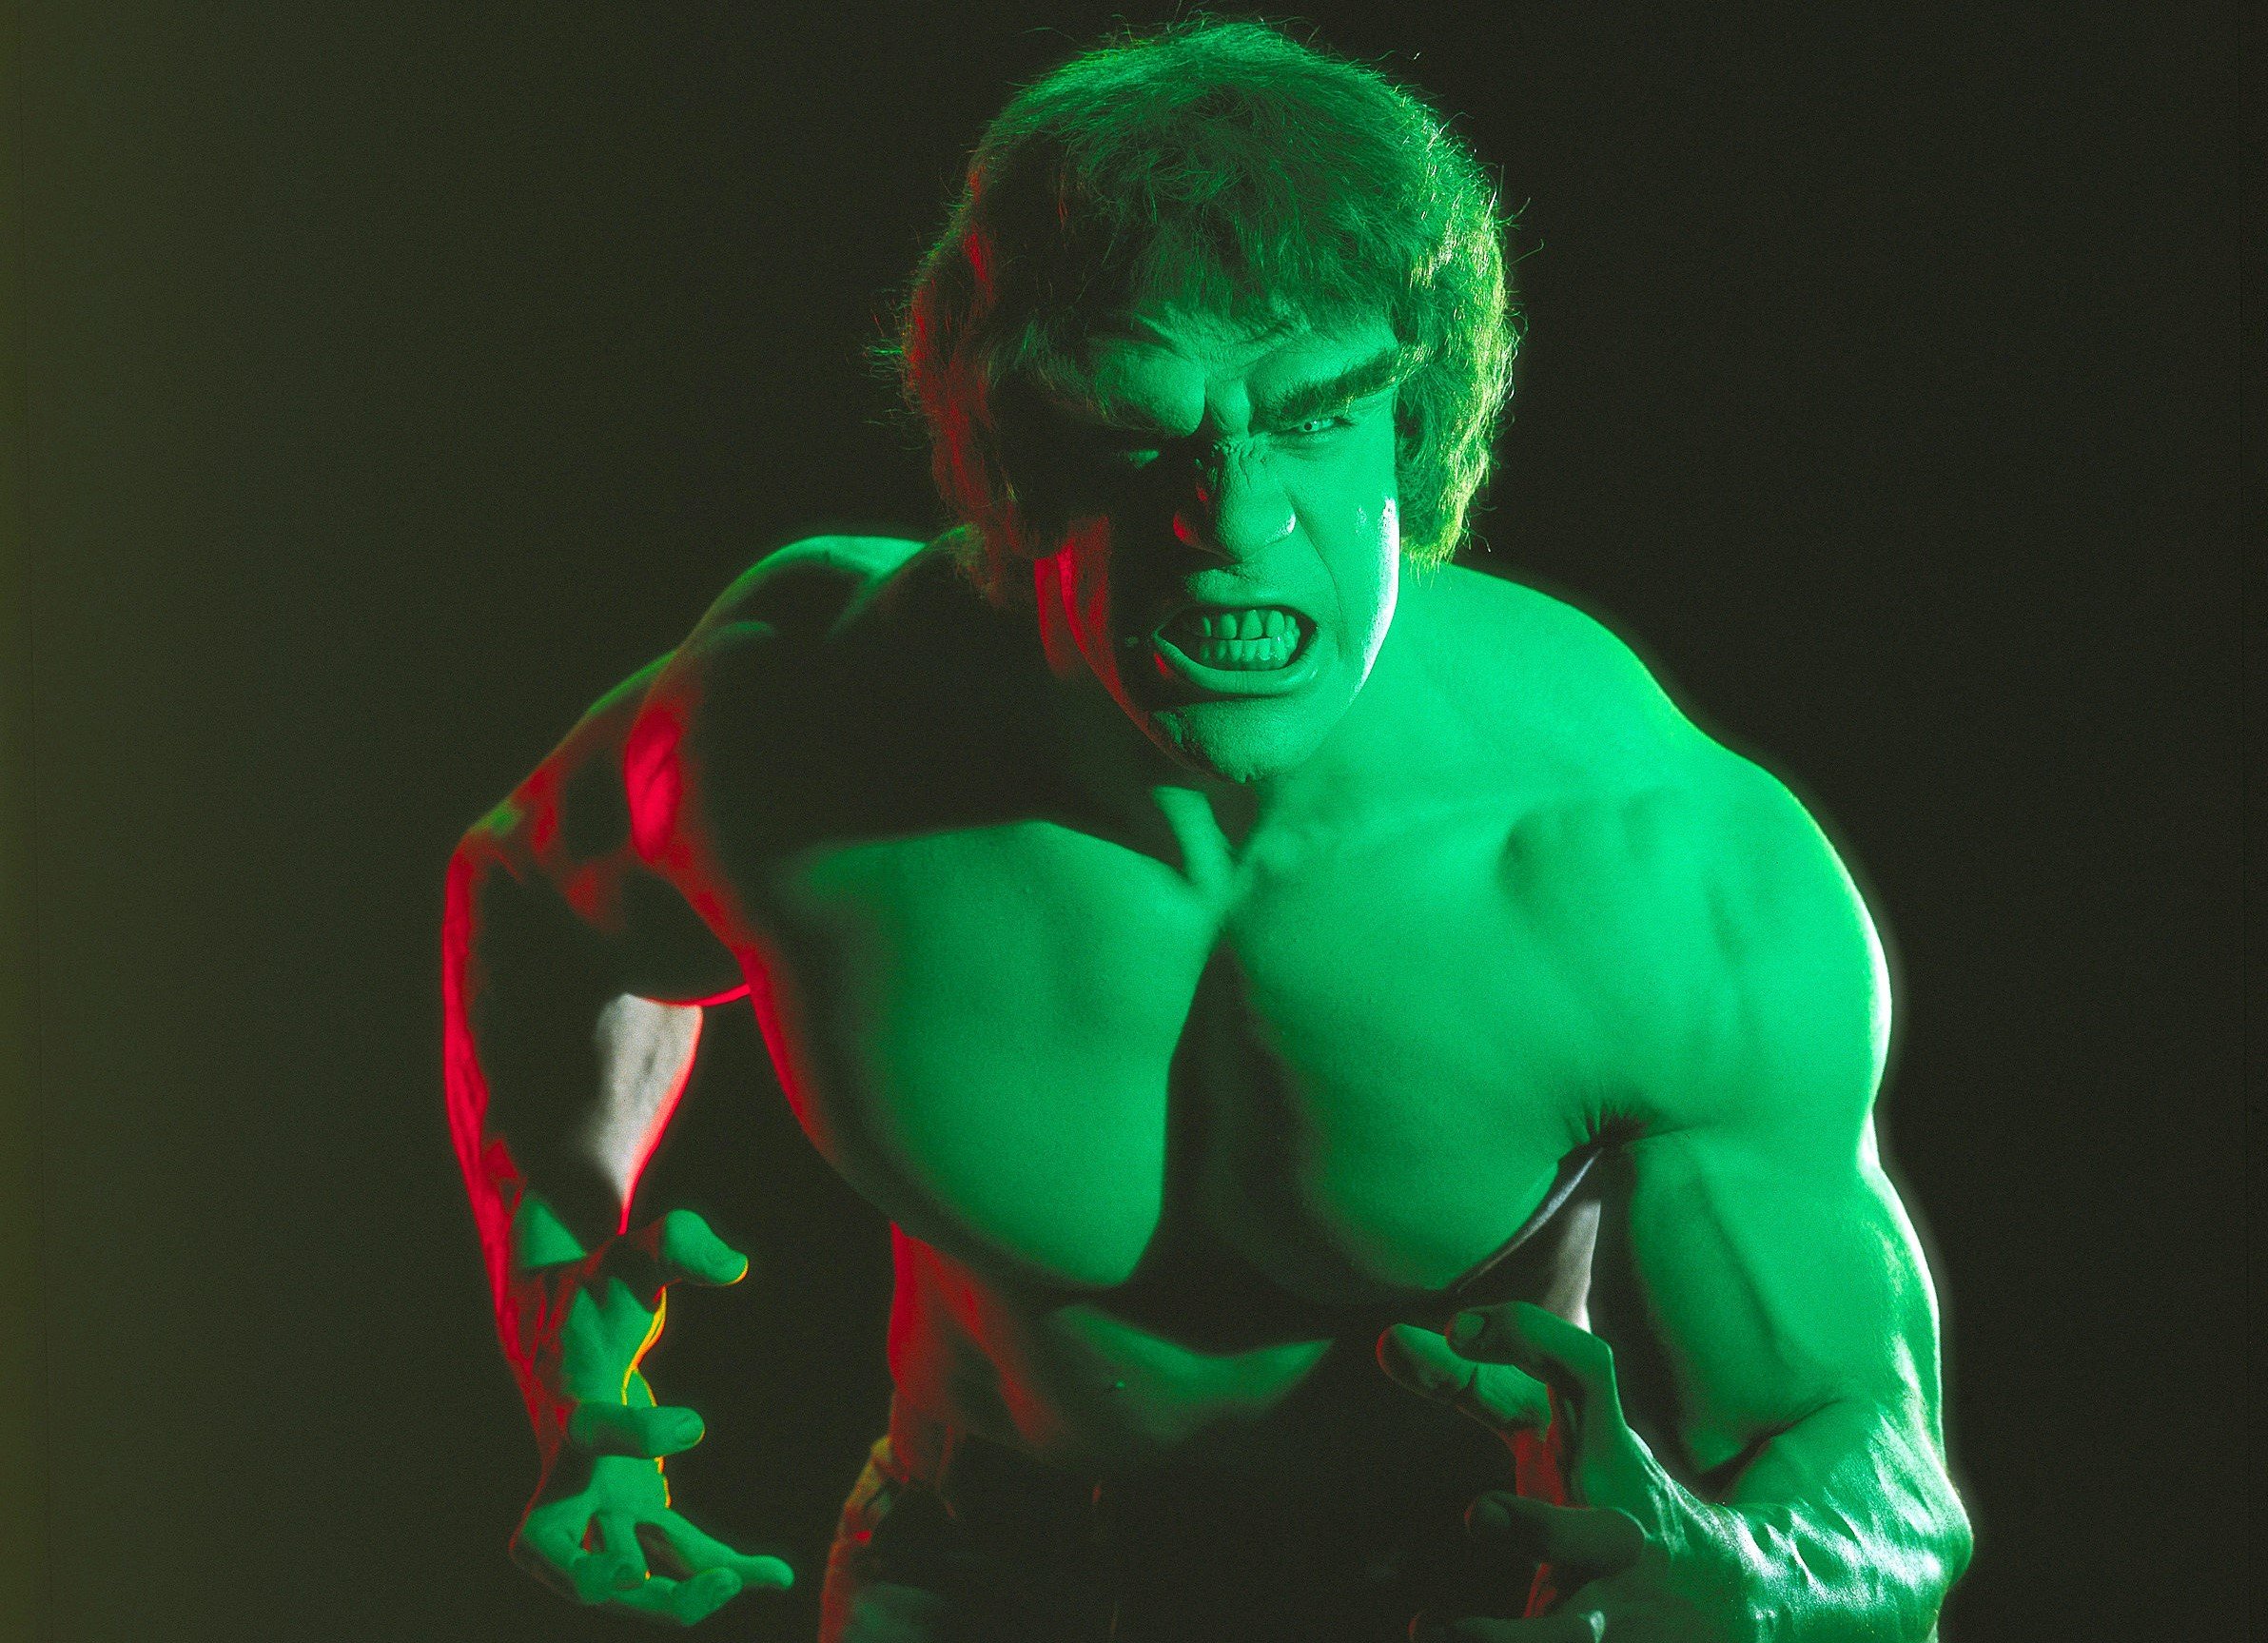 Lou Ferrigno as 'The Incredible Hulk' with red lighting